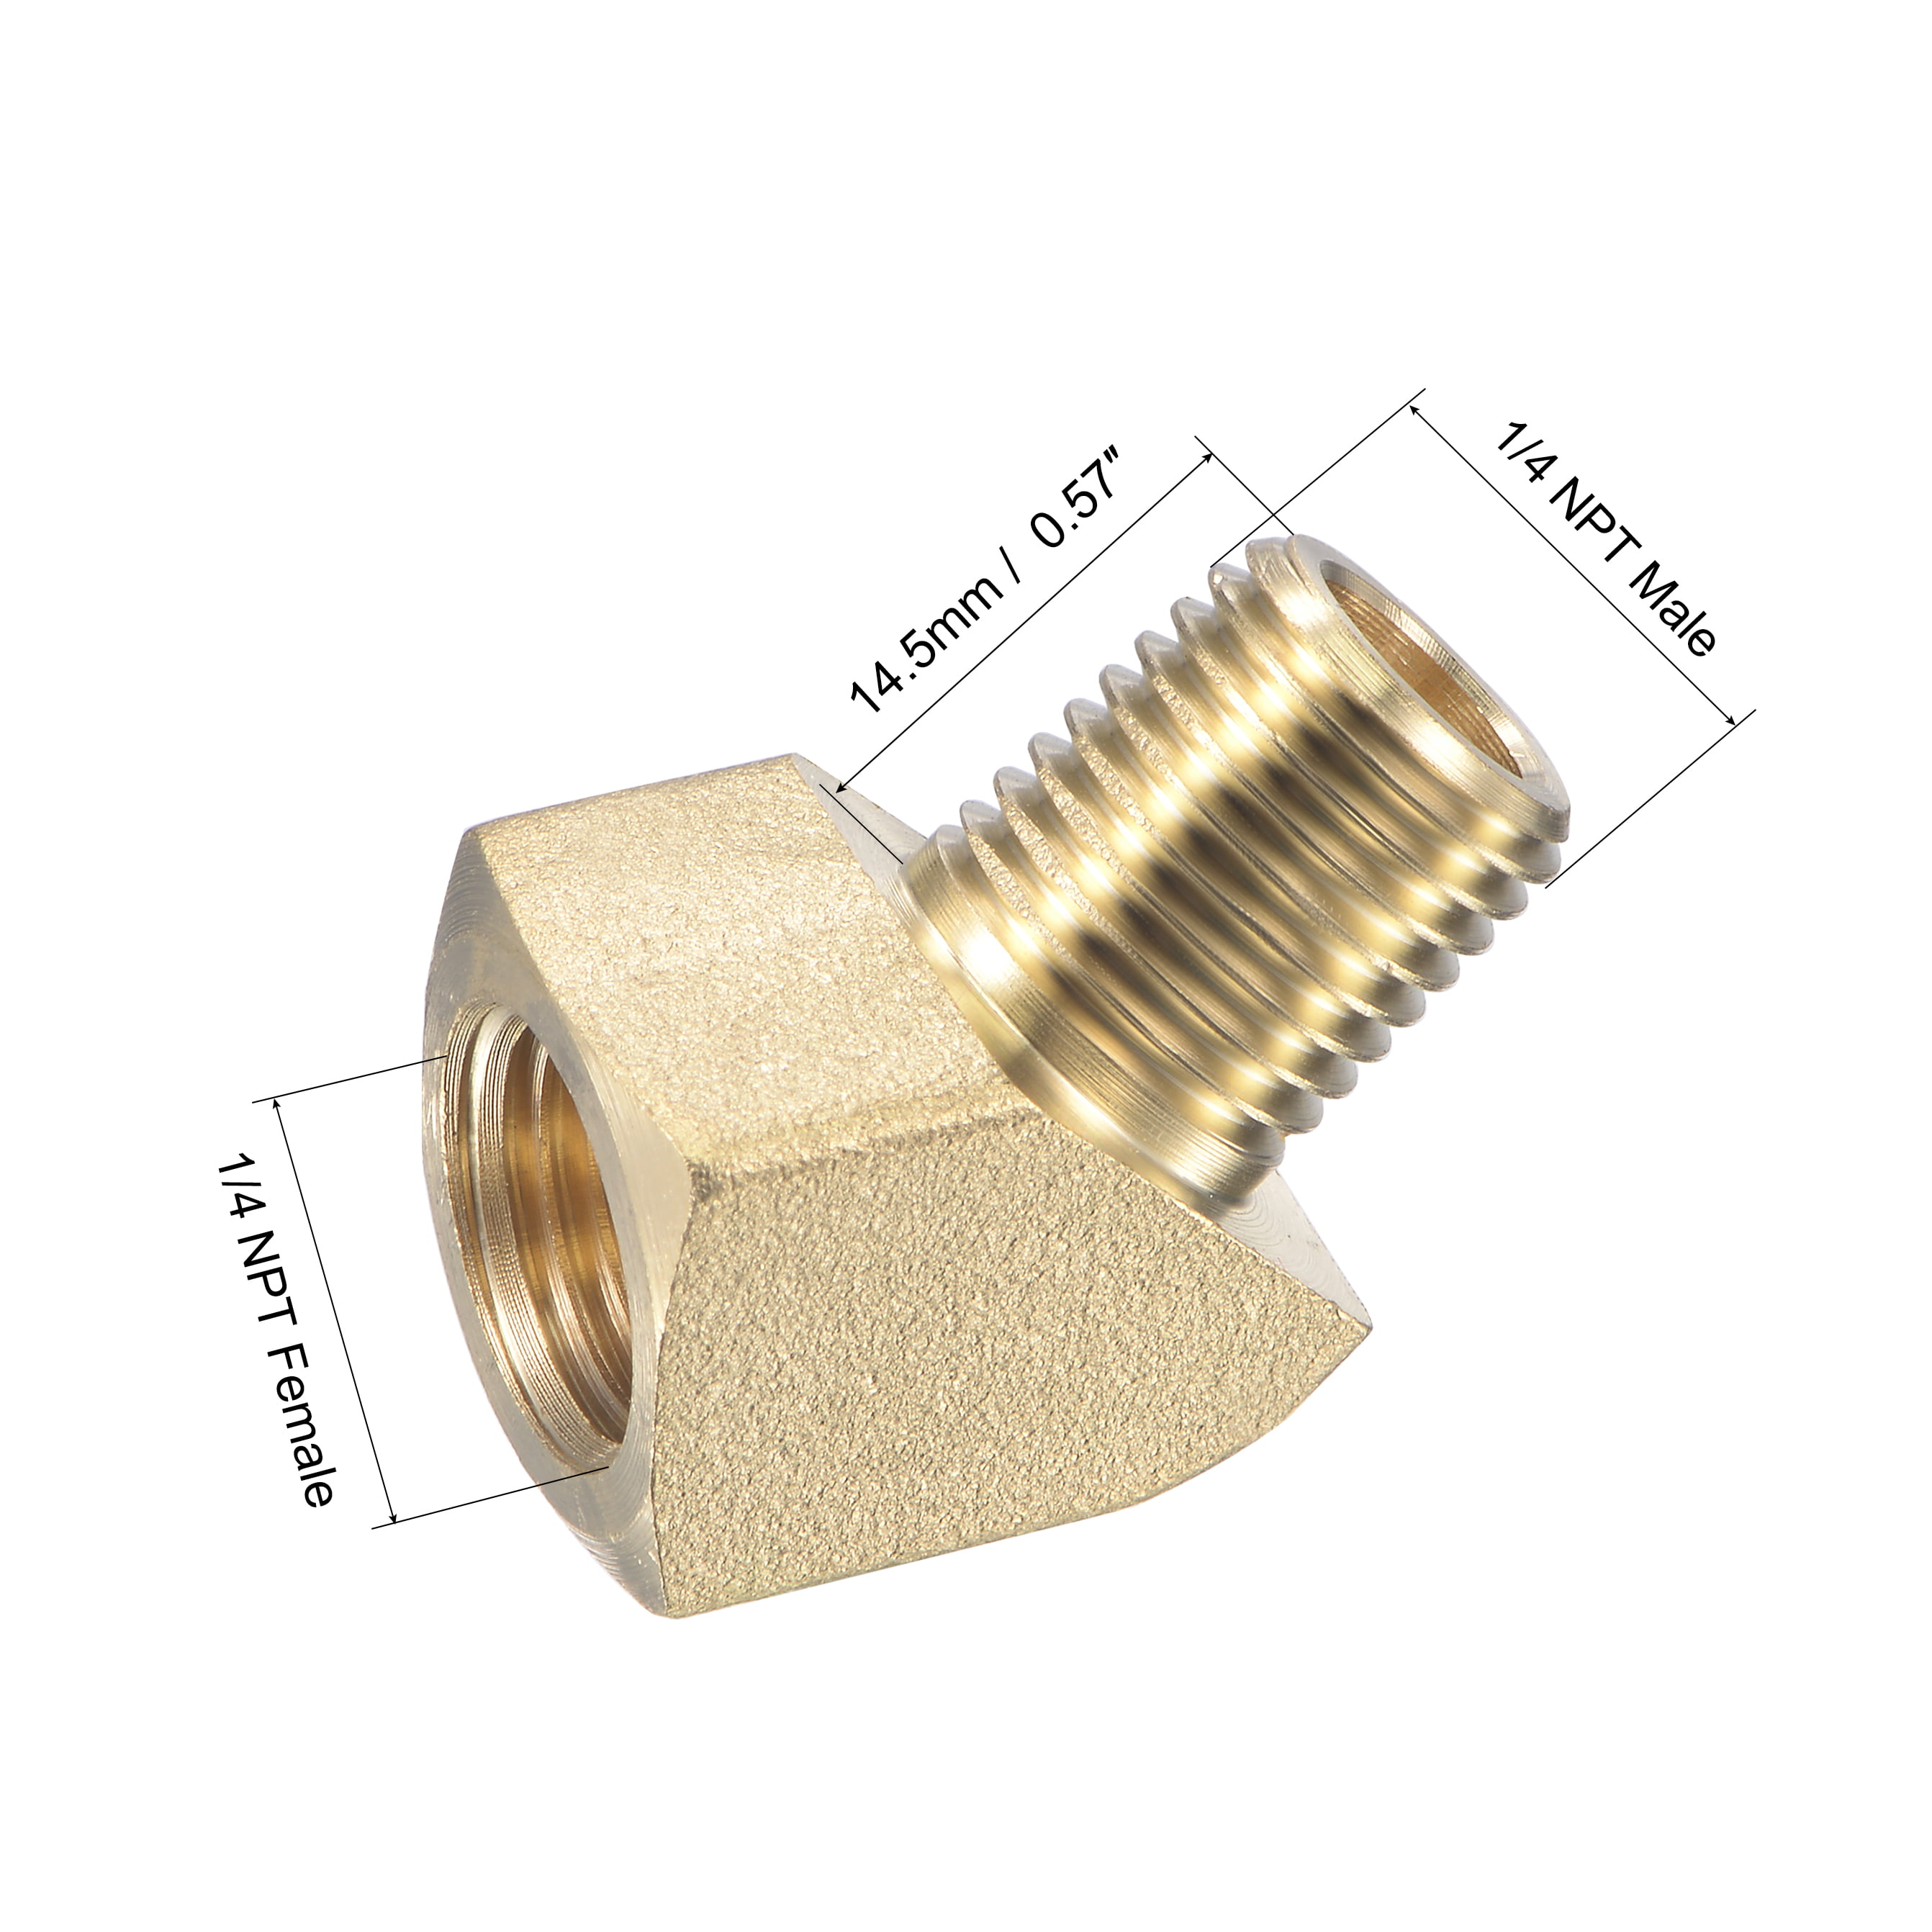 Brass Hose Fitting Elbow 1/4NPT Male to Female Thread 45 Degree Pipe Connector 747709040073 